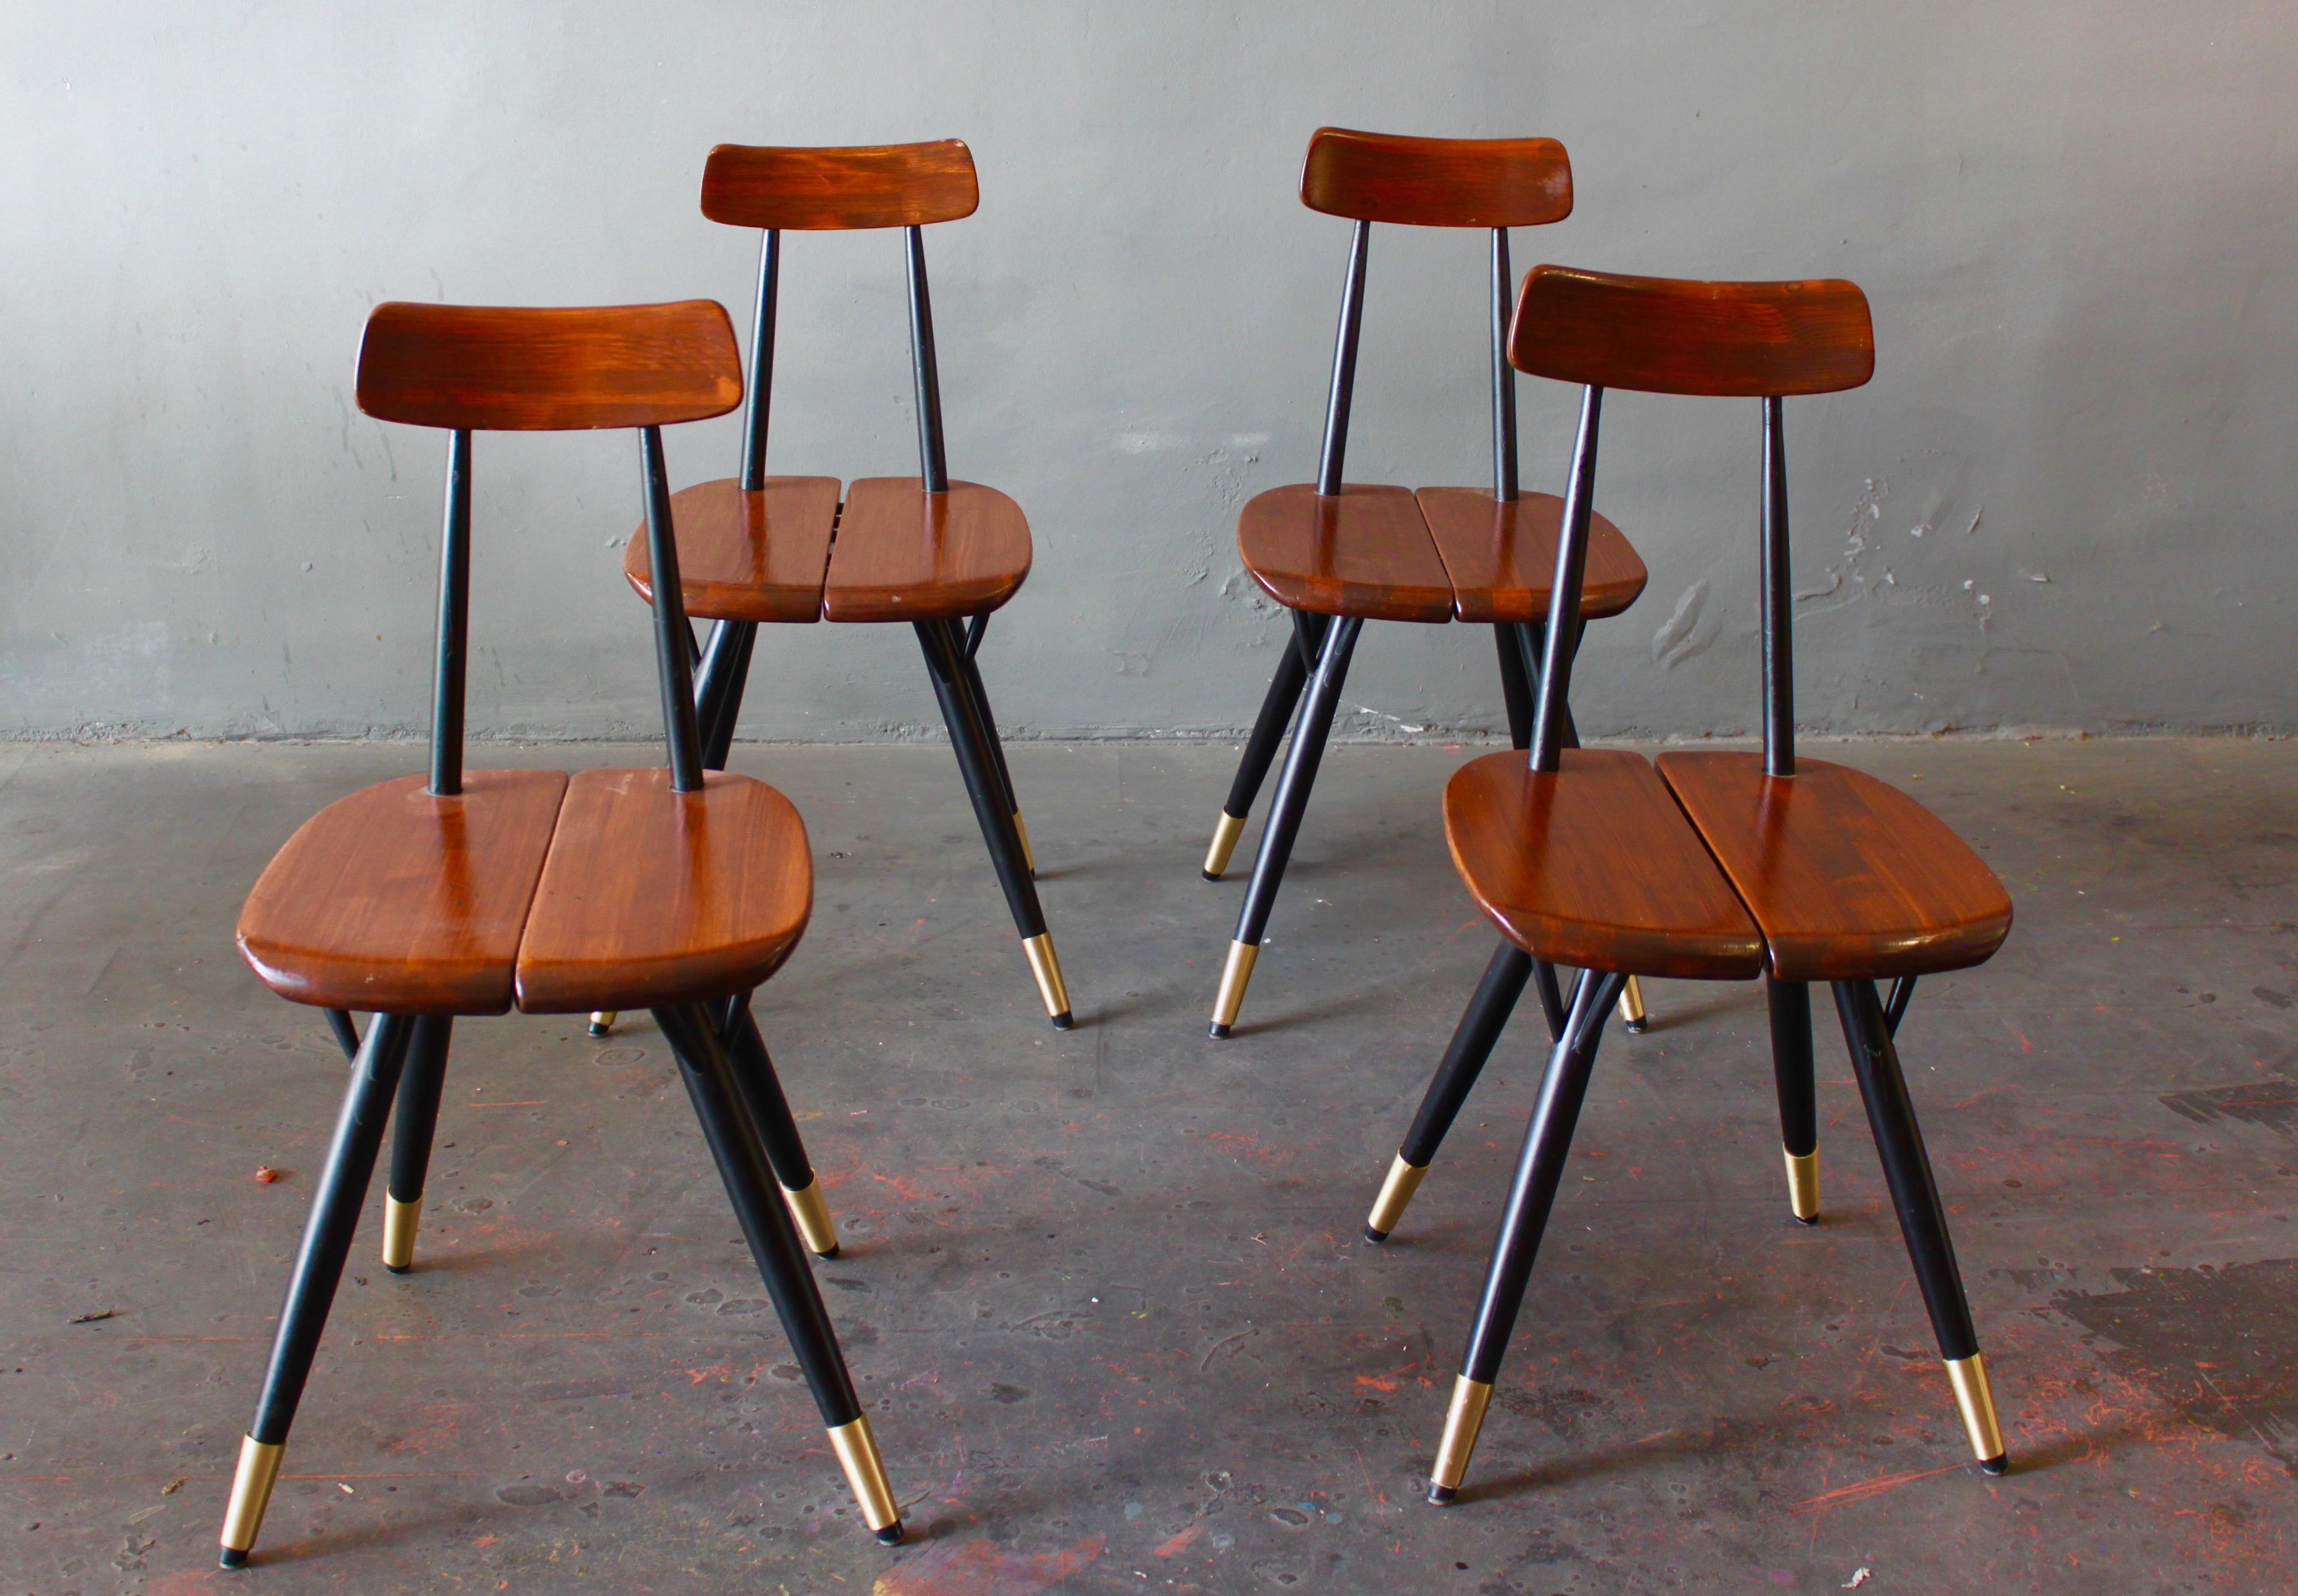 1956 Ilmar Tapiovaara chairs re-visited by Atelier Staab. Highered 3cm with brass feet to give them today’s seat heights.
Made in 1956 the original design has a low seating heights, almost like children’s chairs. This midcentury classics are now